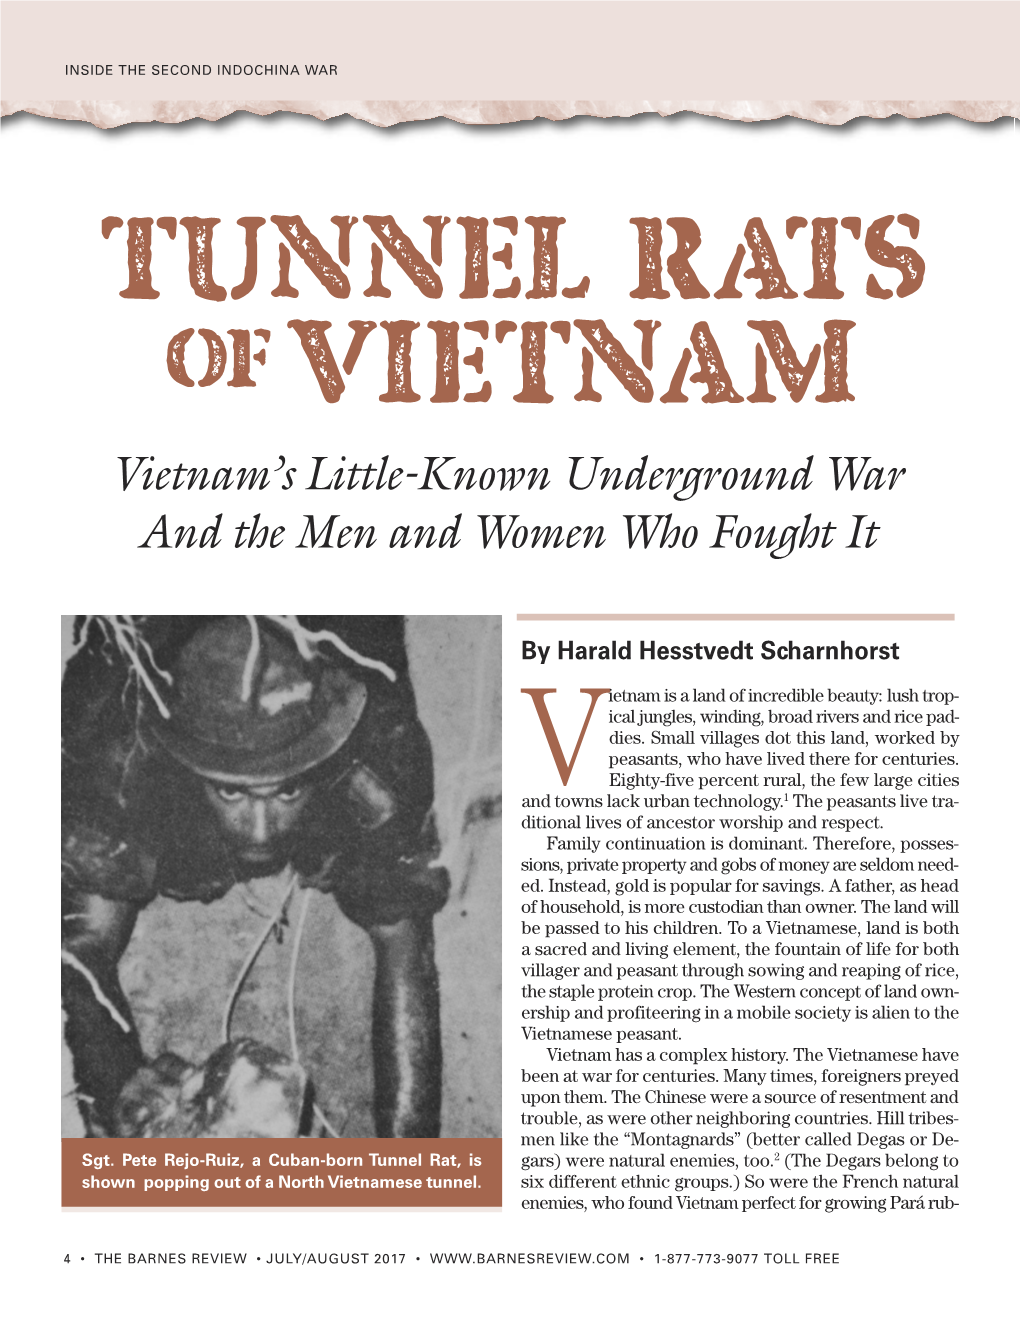 TUNNEL RATS of VIETNAM Vietnam’S Little-Known Underground War and the Men and Women Who Fought It